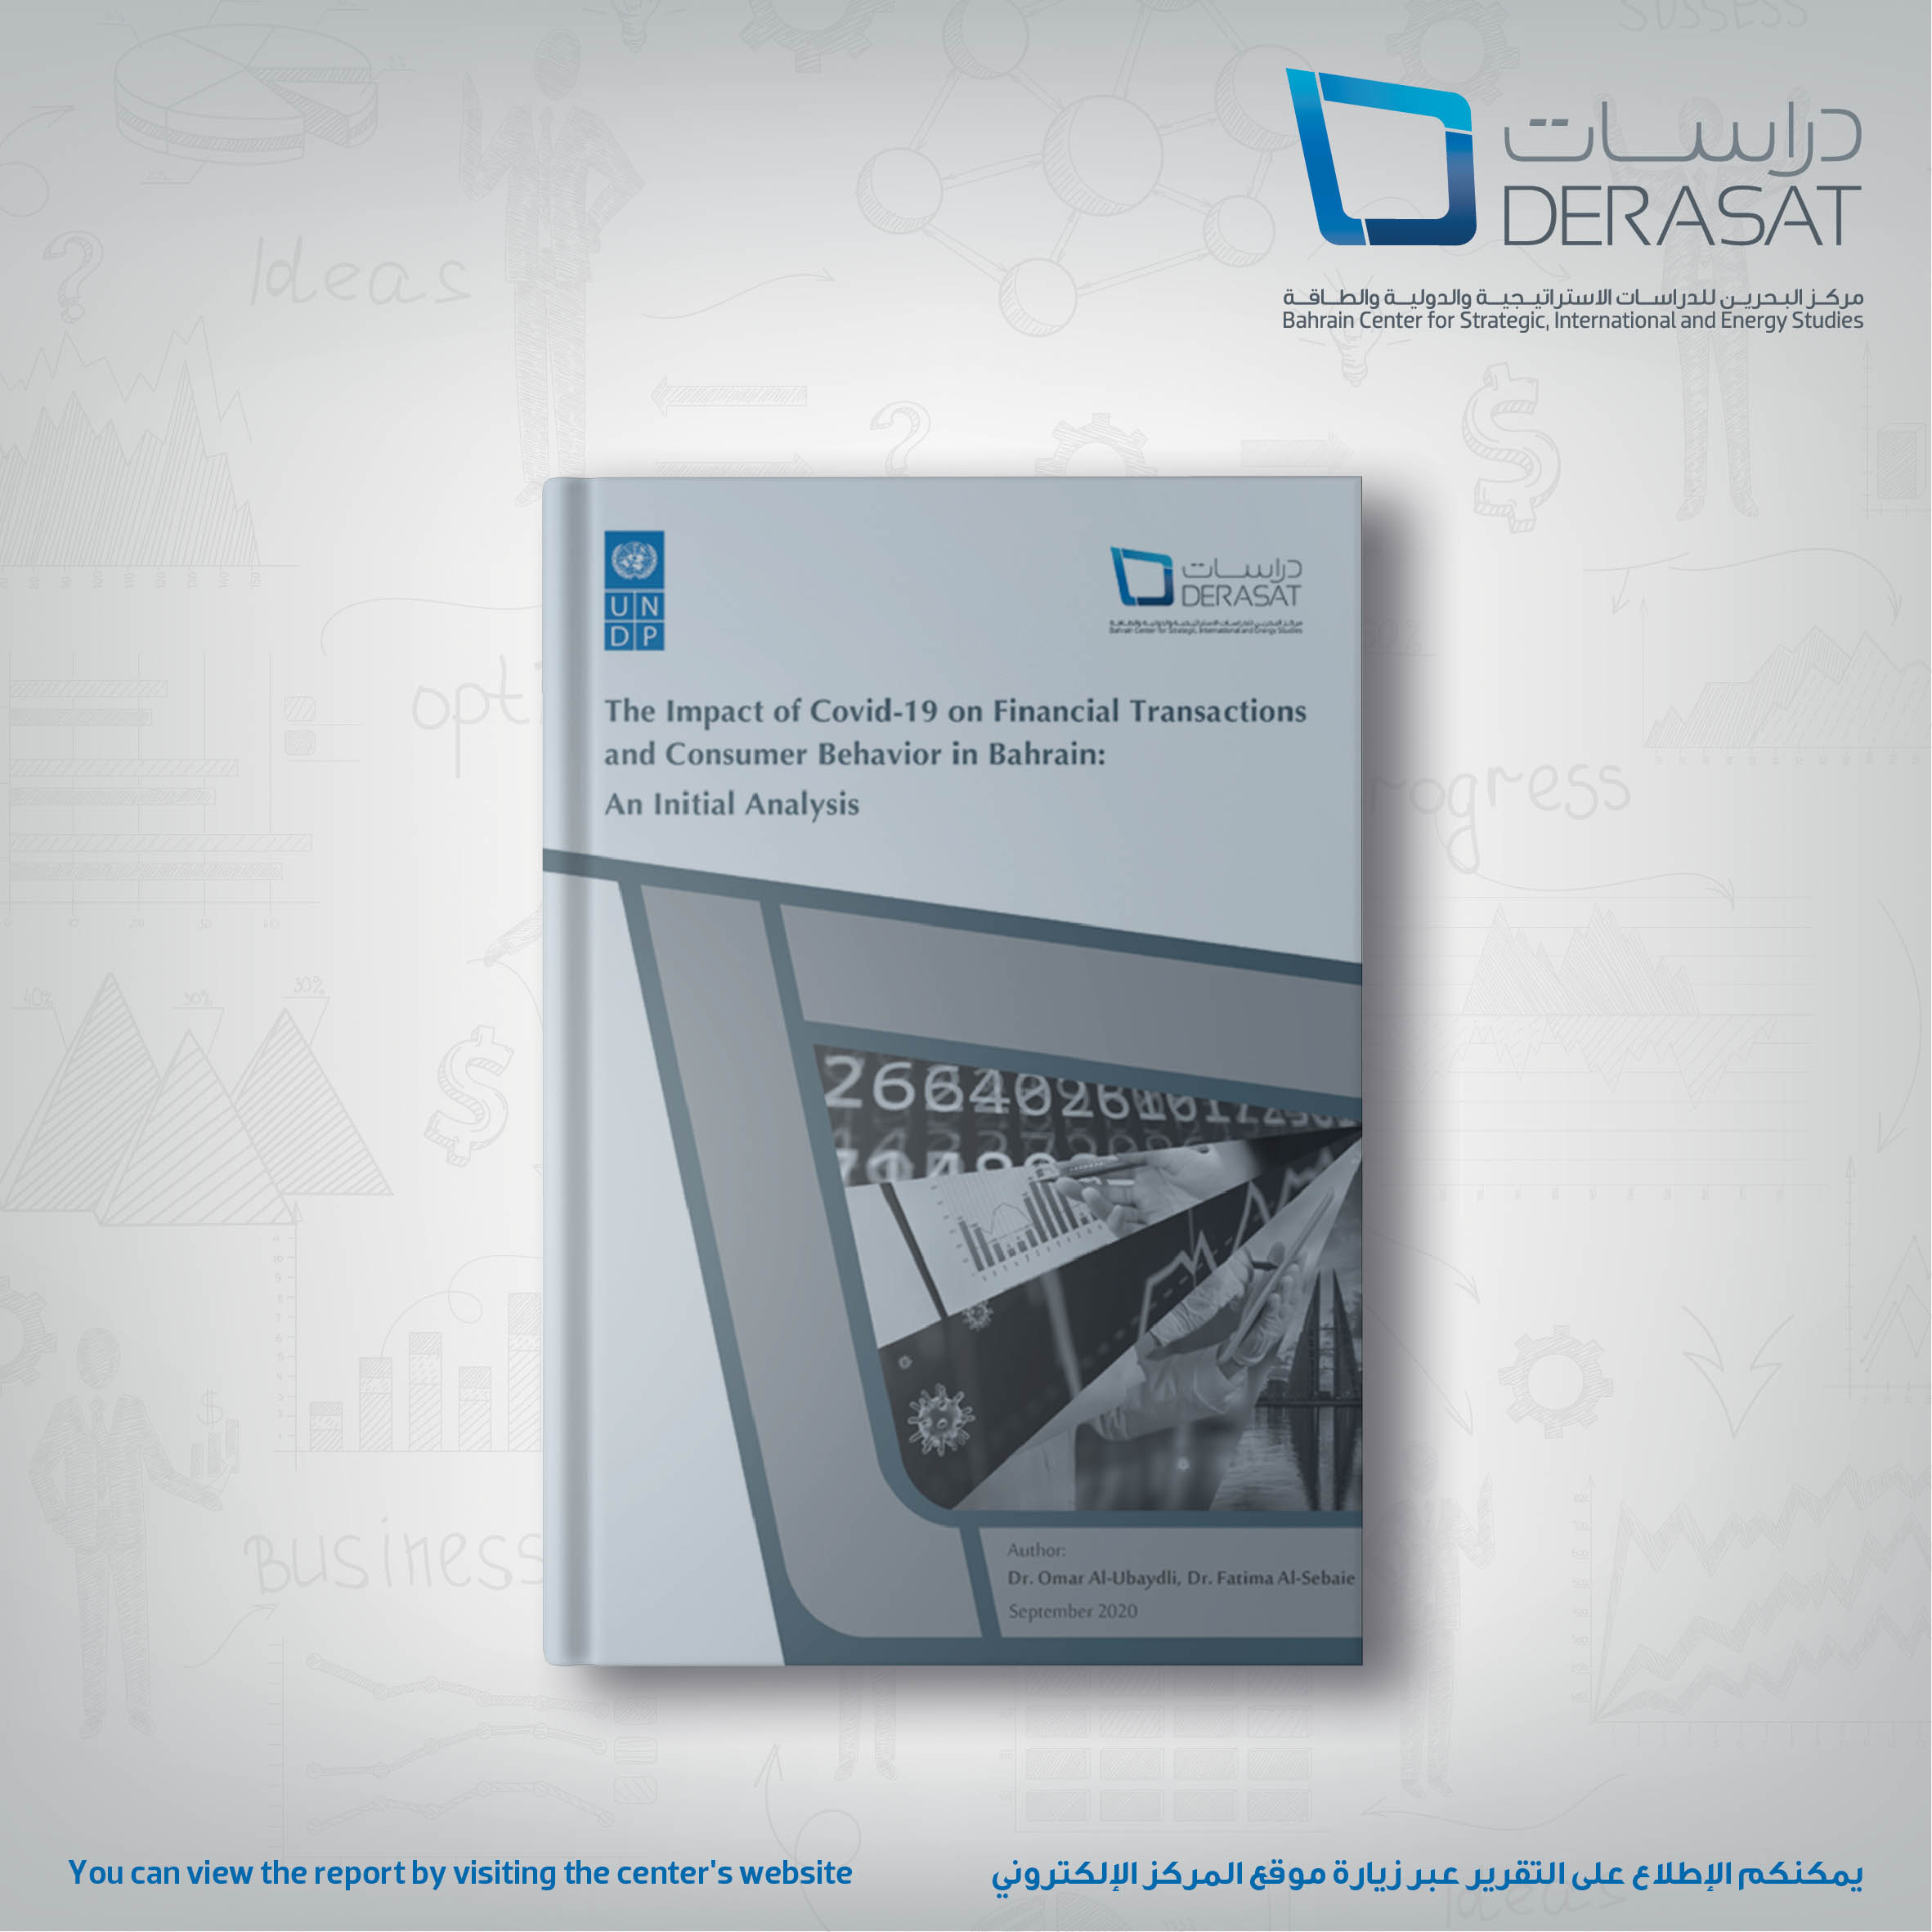 The Impact of the COVID-19 on Financial Transactions and Consumer Behavior in Bahrain: An Initial Analysis